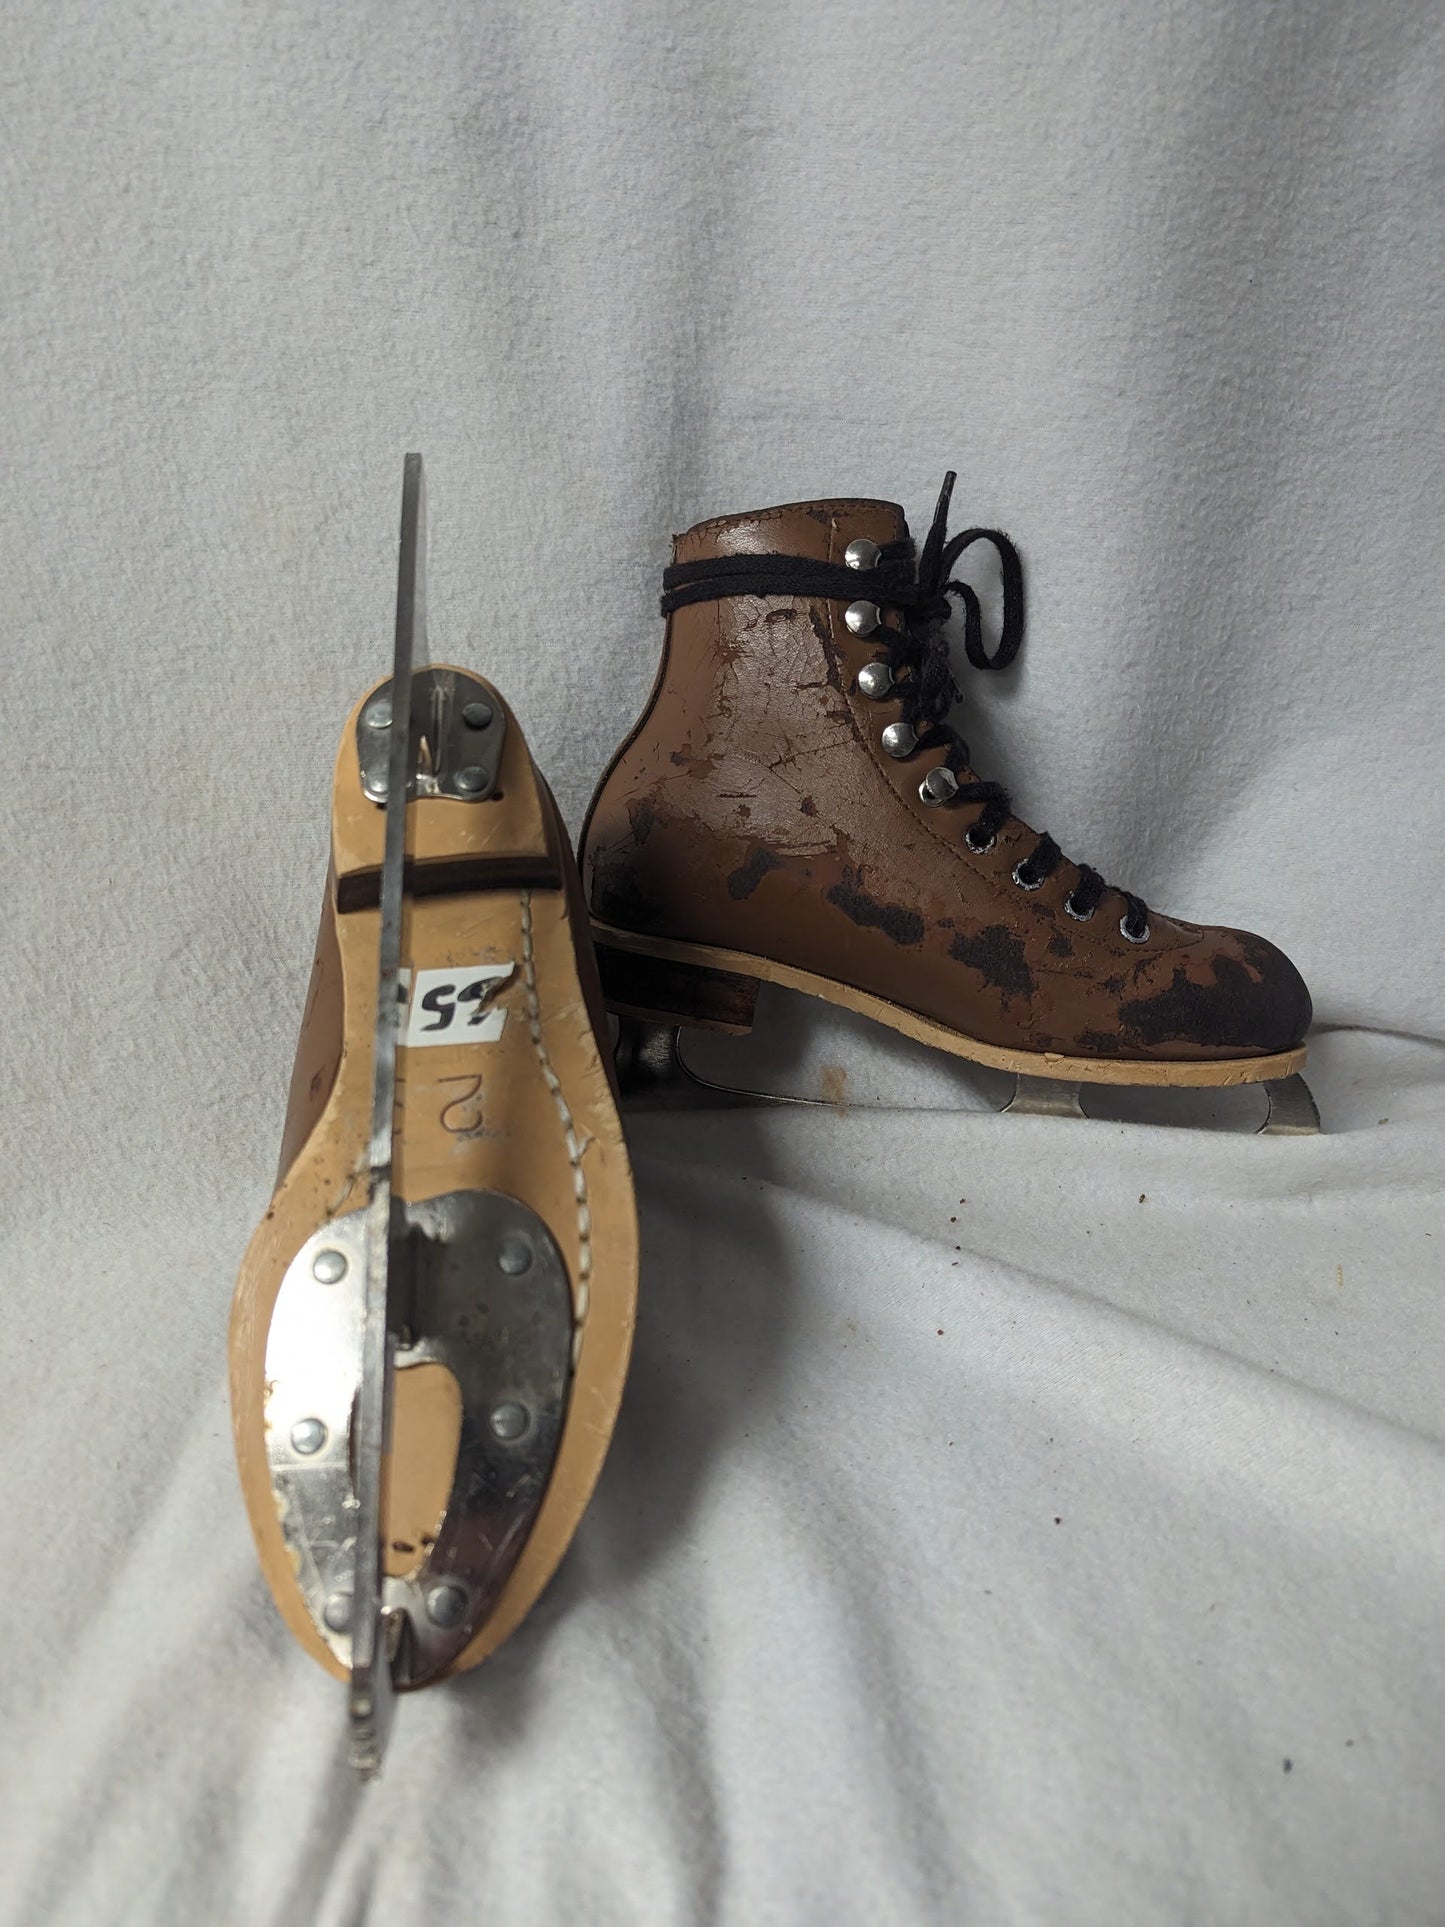 Rink Master Ice Skates Size 2 Color Brown Condition Used